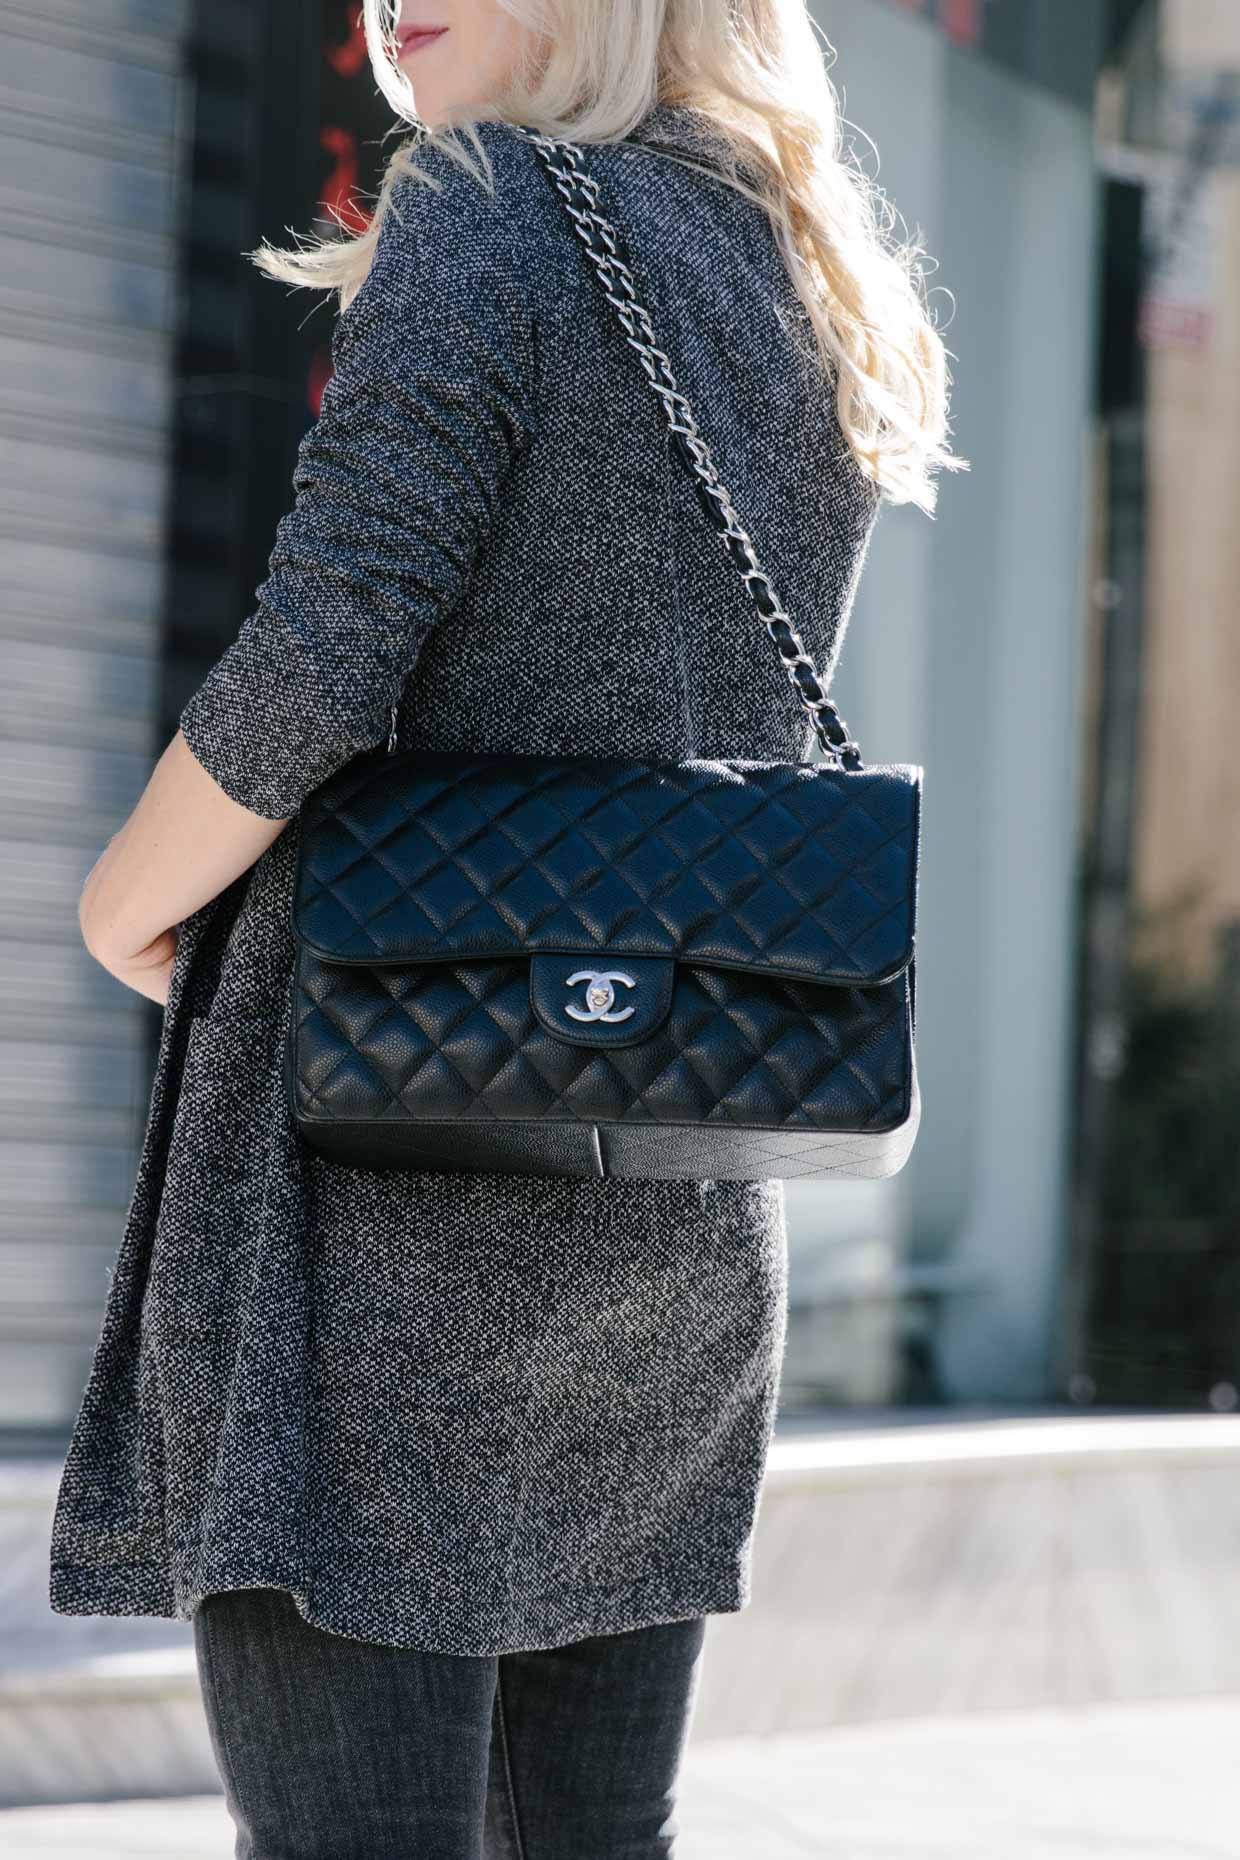 Chic outfit idea with long blazer and Chanel Jumbo classic bag